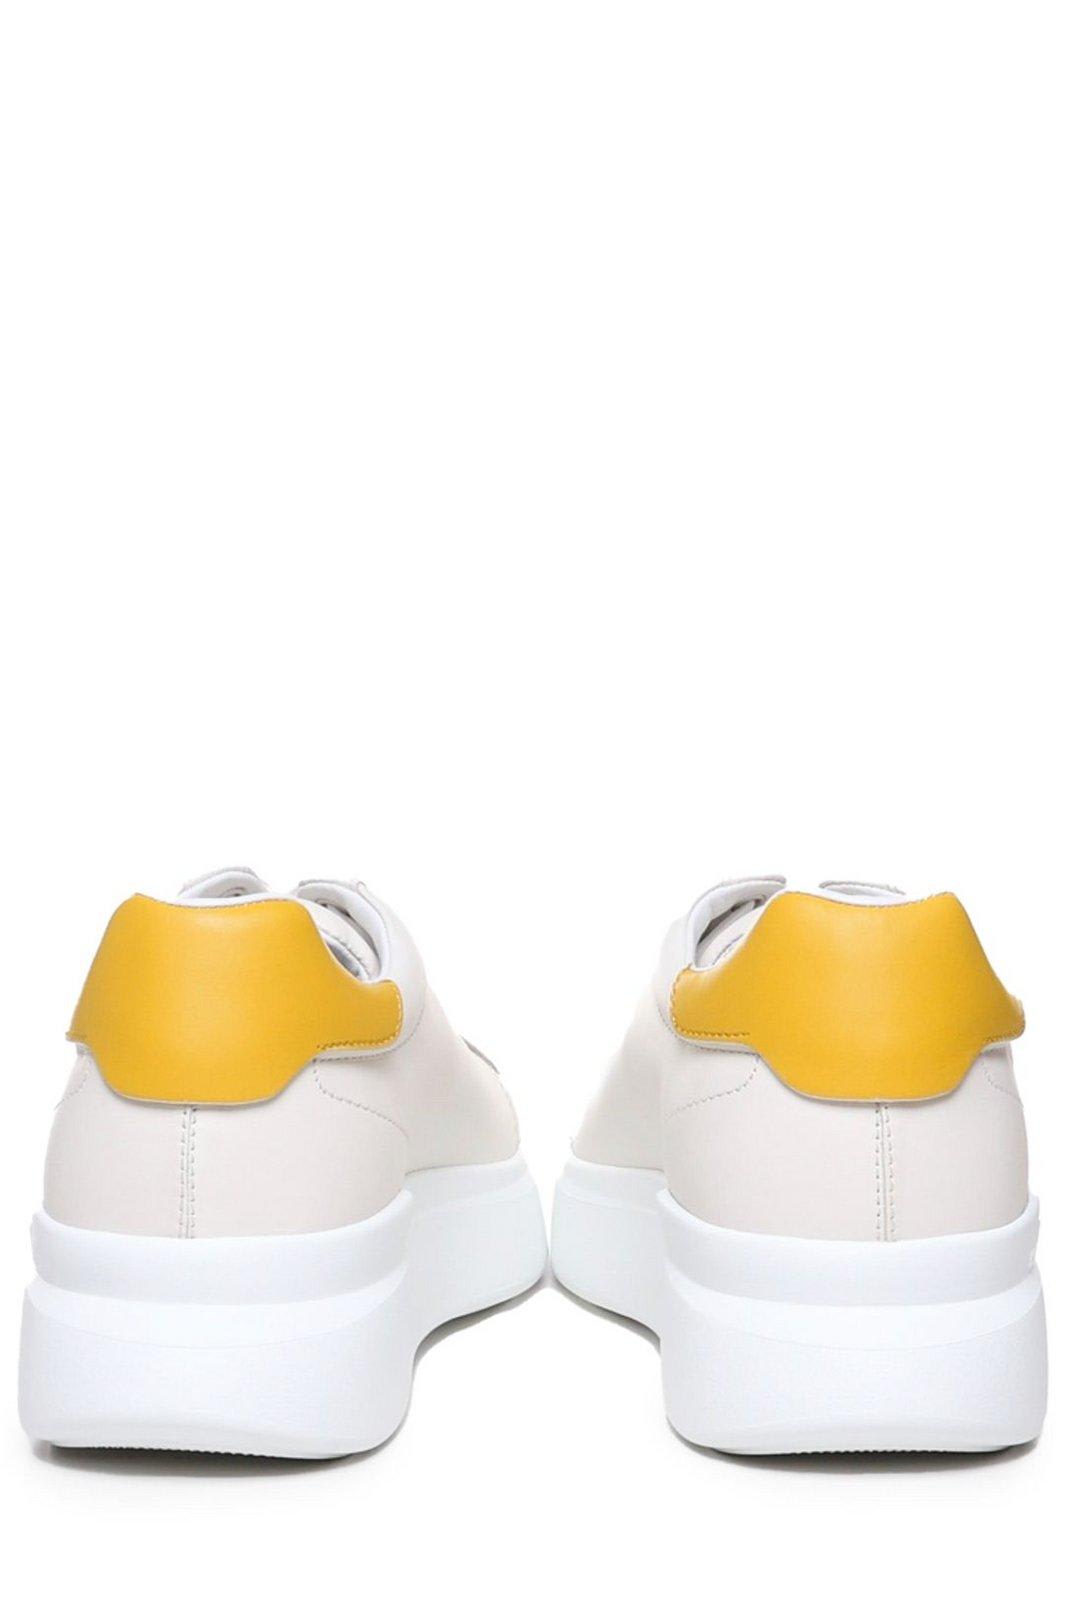 Shop Hogan H580 Side H Patch Sneakers In White